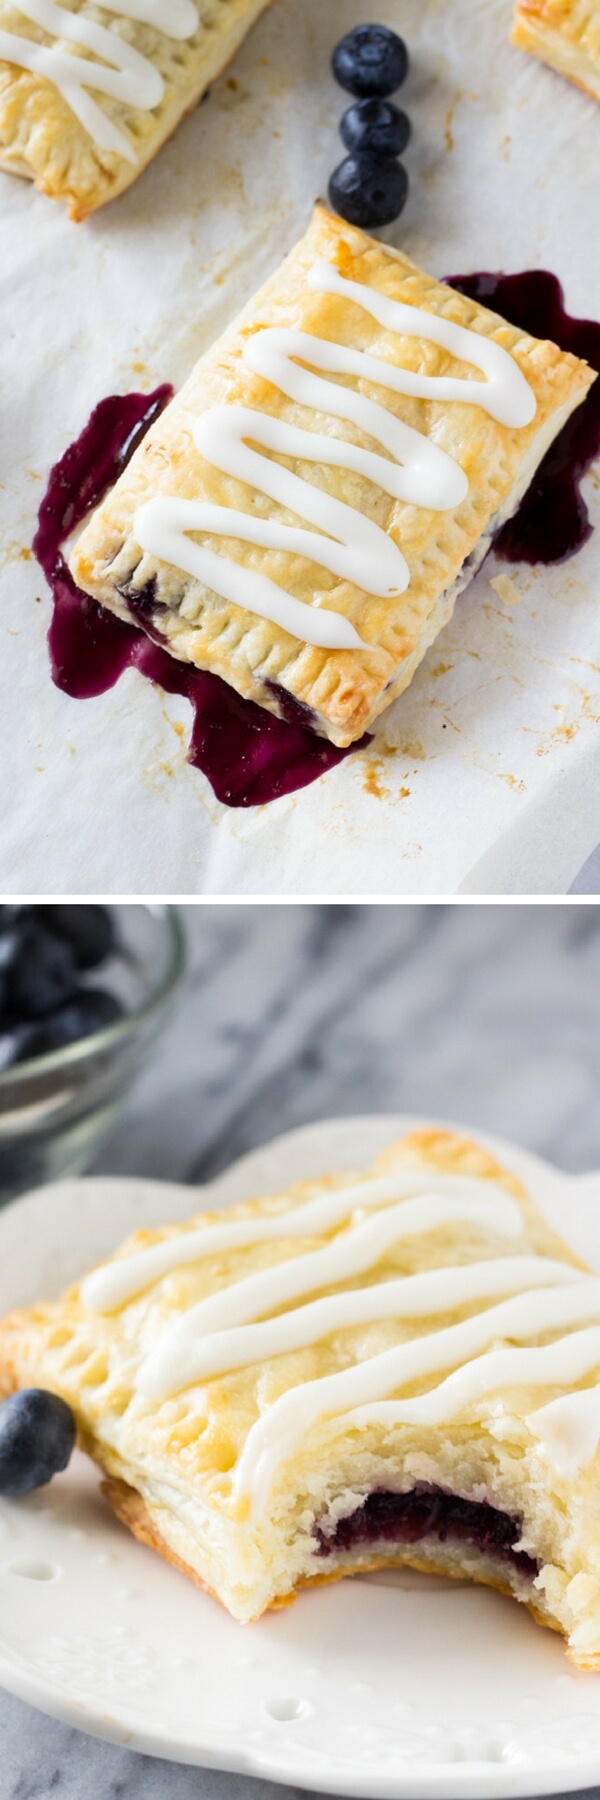 Buttery, flaky homemade blueberry toaster strudels with juicy blueberry centers and sweet vanilla glaze. 1000 times better than the store bought variety - learn to make them at home!